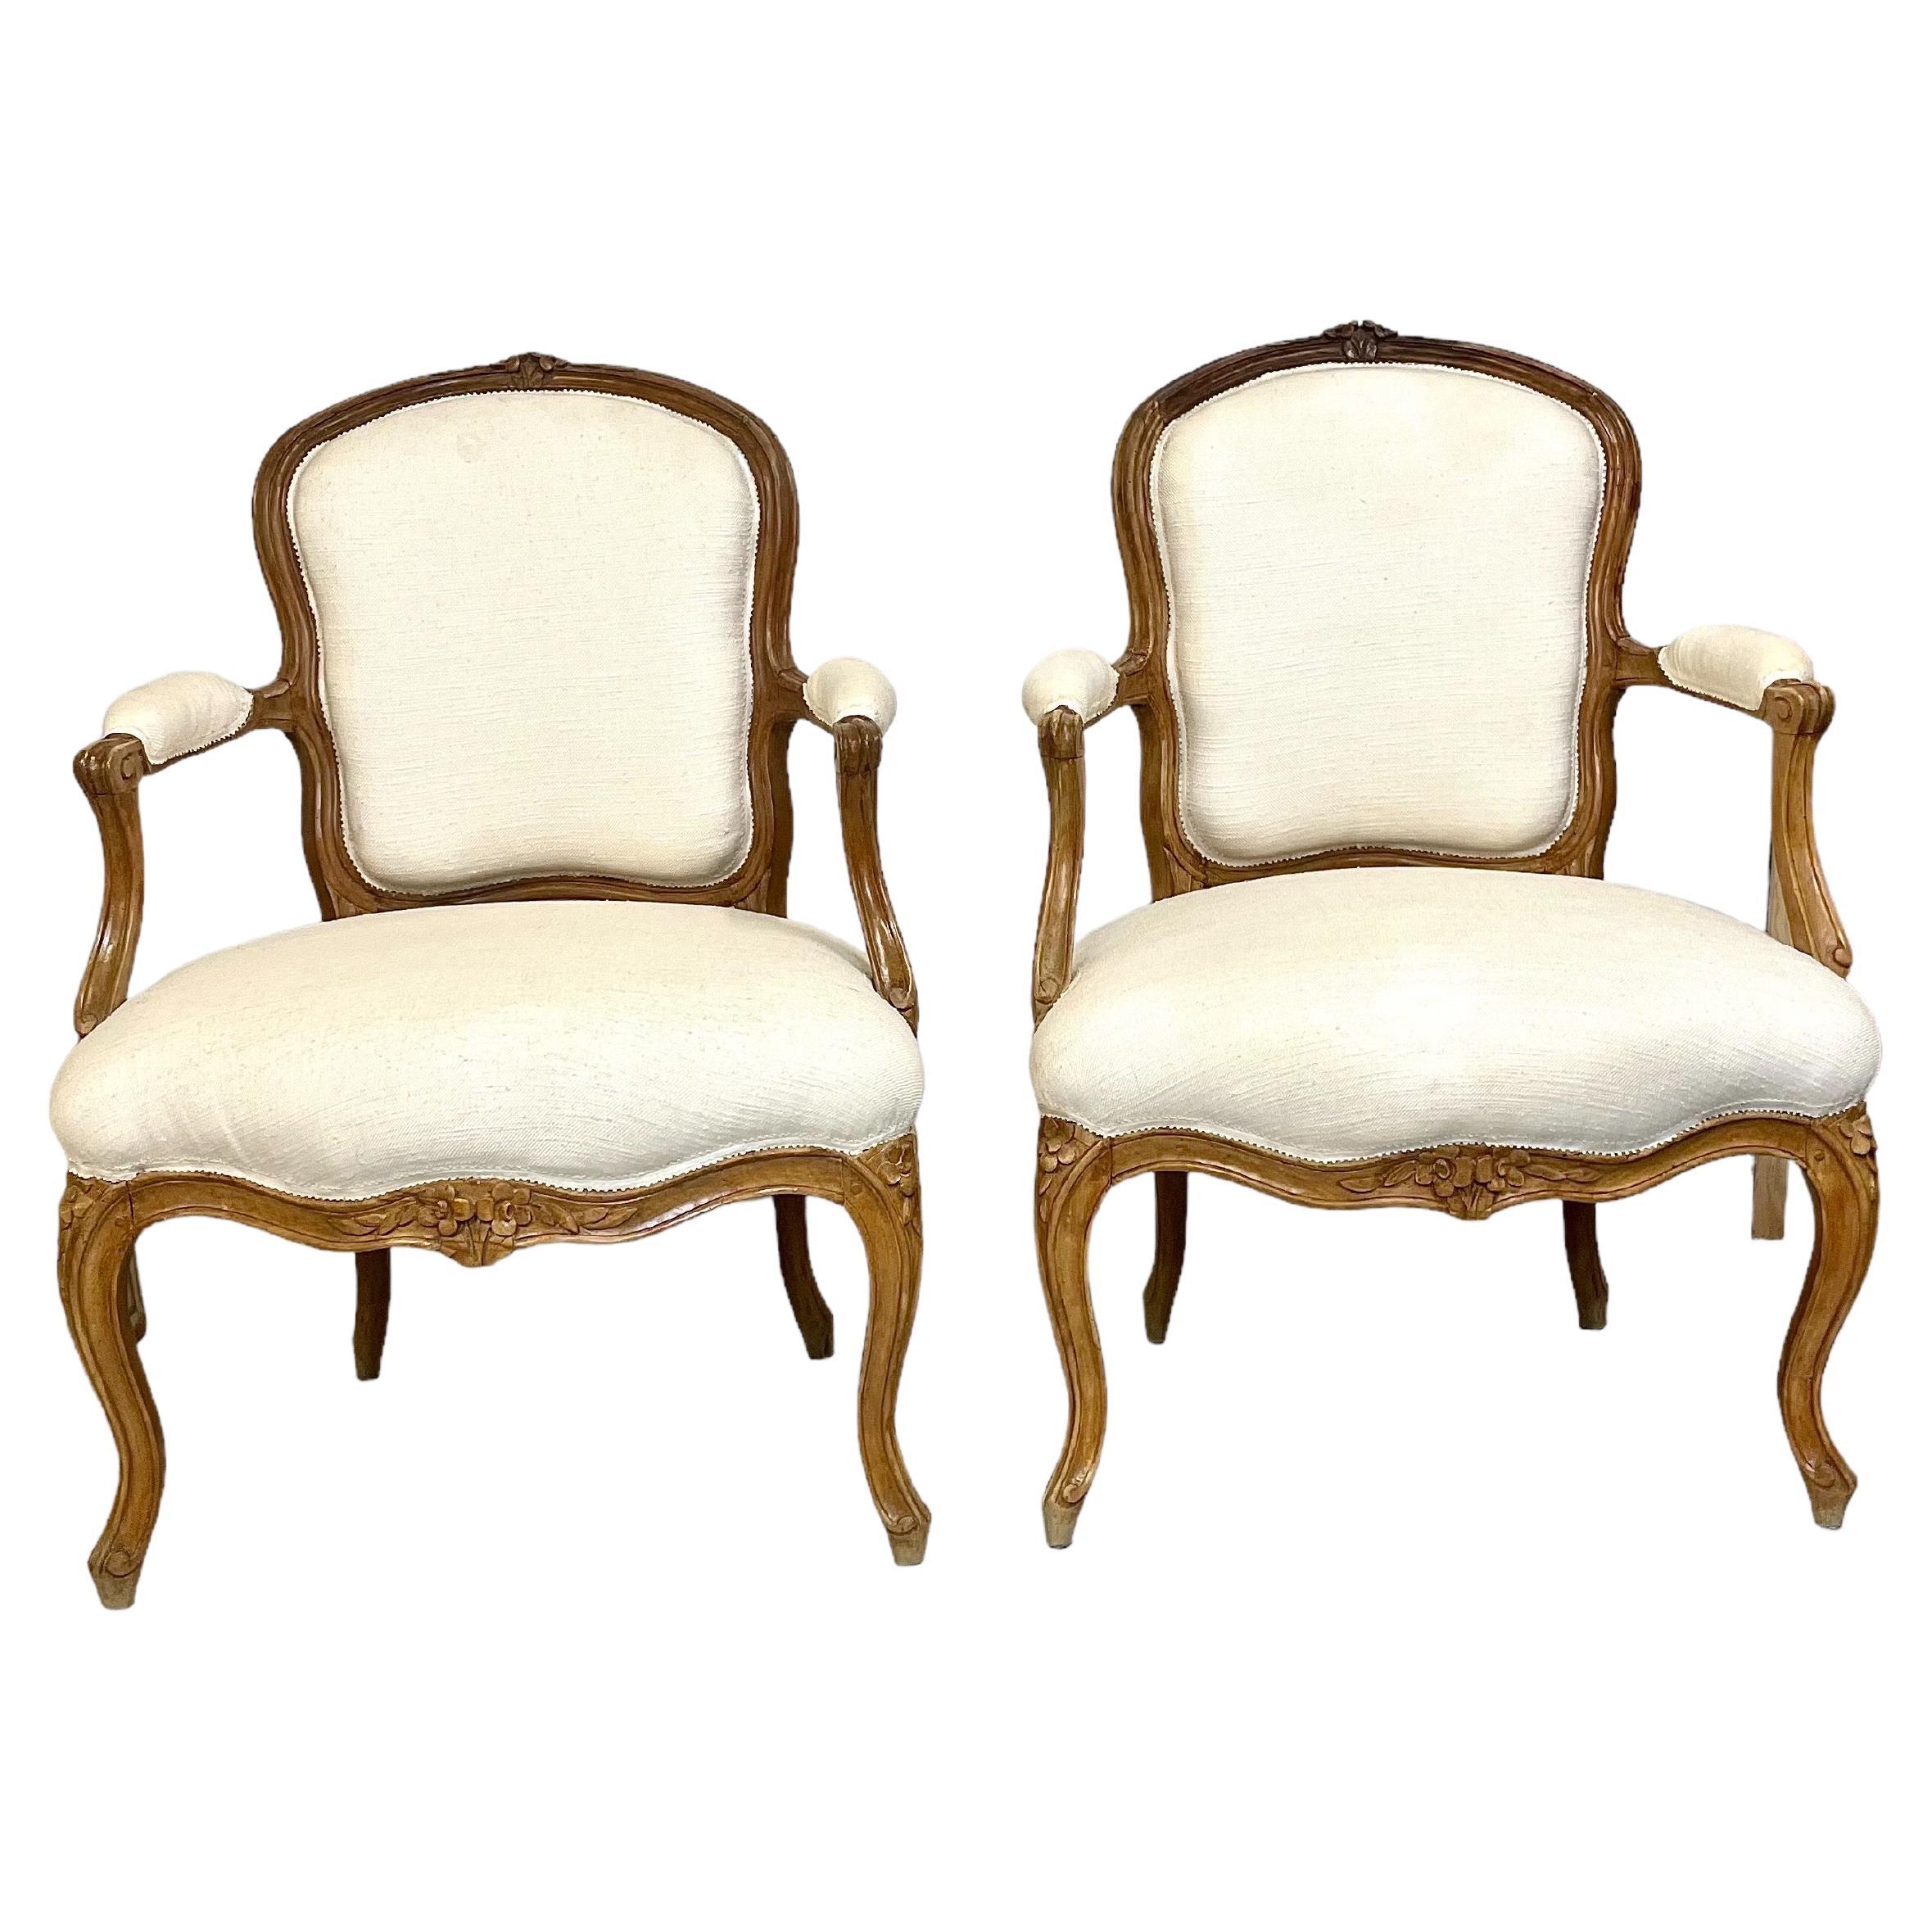 Louis XV Period Pair of Walnut Cabriolets Armchairs, 18th Century For Sale